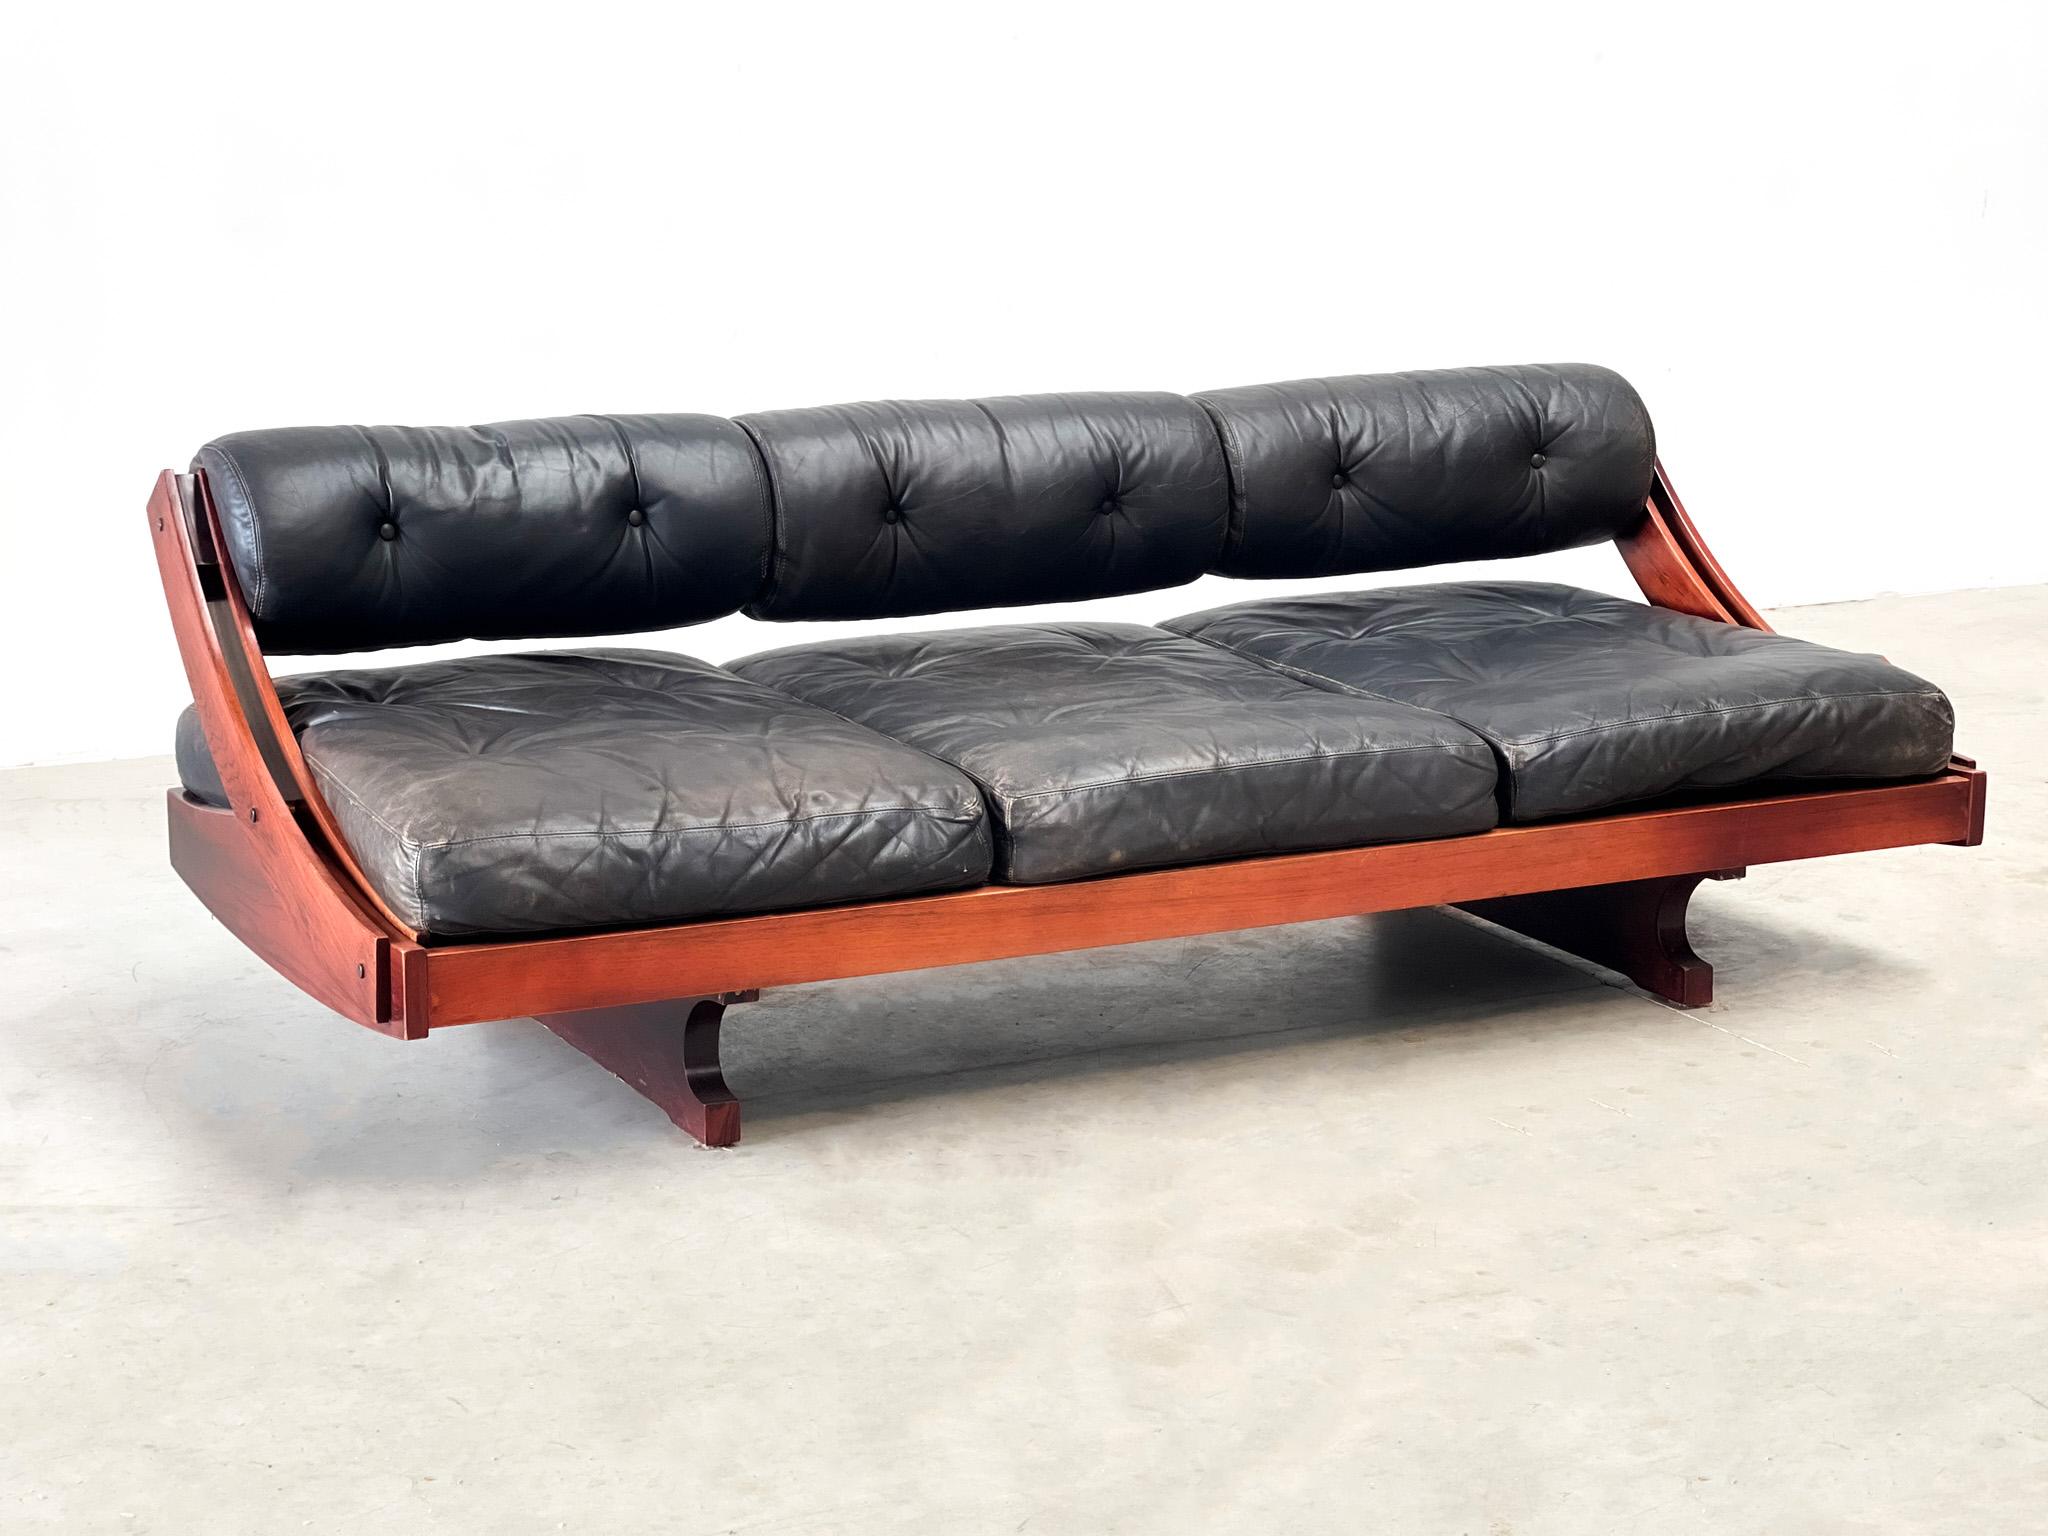 GS195 sofa or daybed by Gianni Songia
Very nice and classic piece of Italian design.

This daybed or sofa was designed by Sangia in the 1960s. The well-known company Sormani took this design into production in the 1960s. This is one of the first